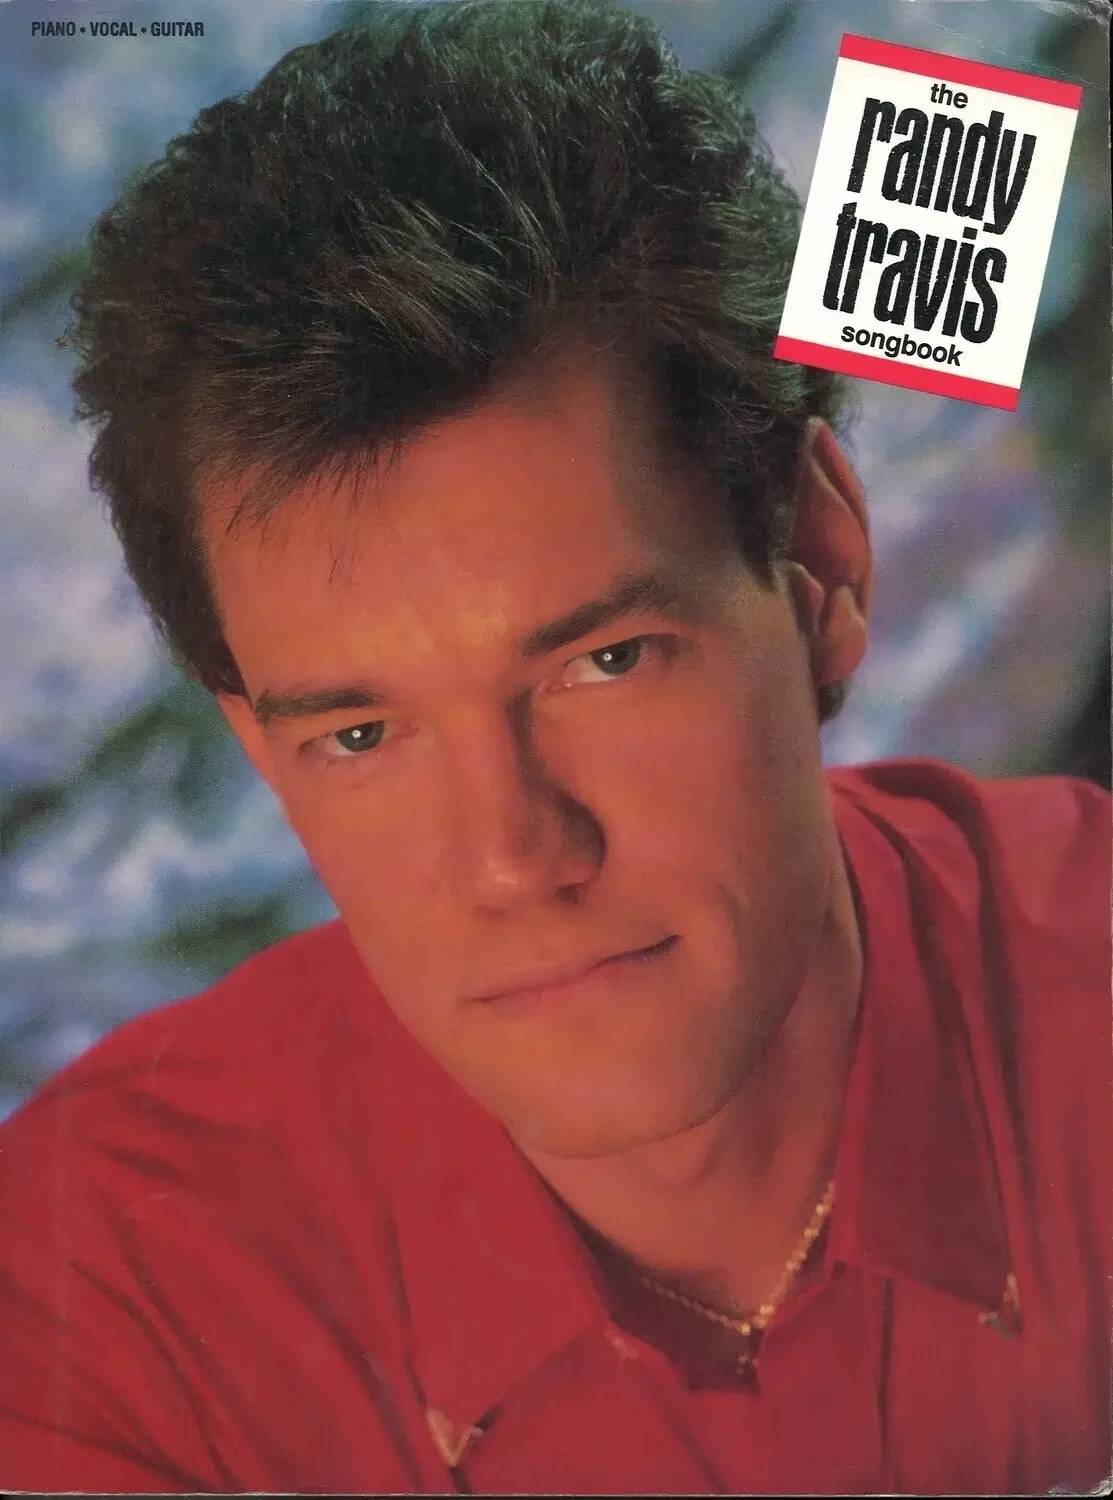 The Randy Travis Songbook, Jill Youngblood